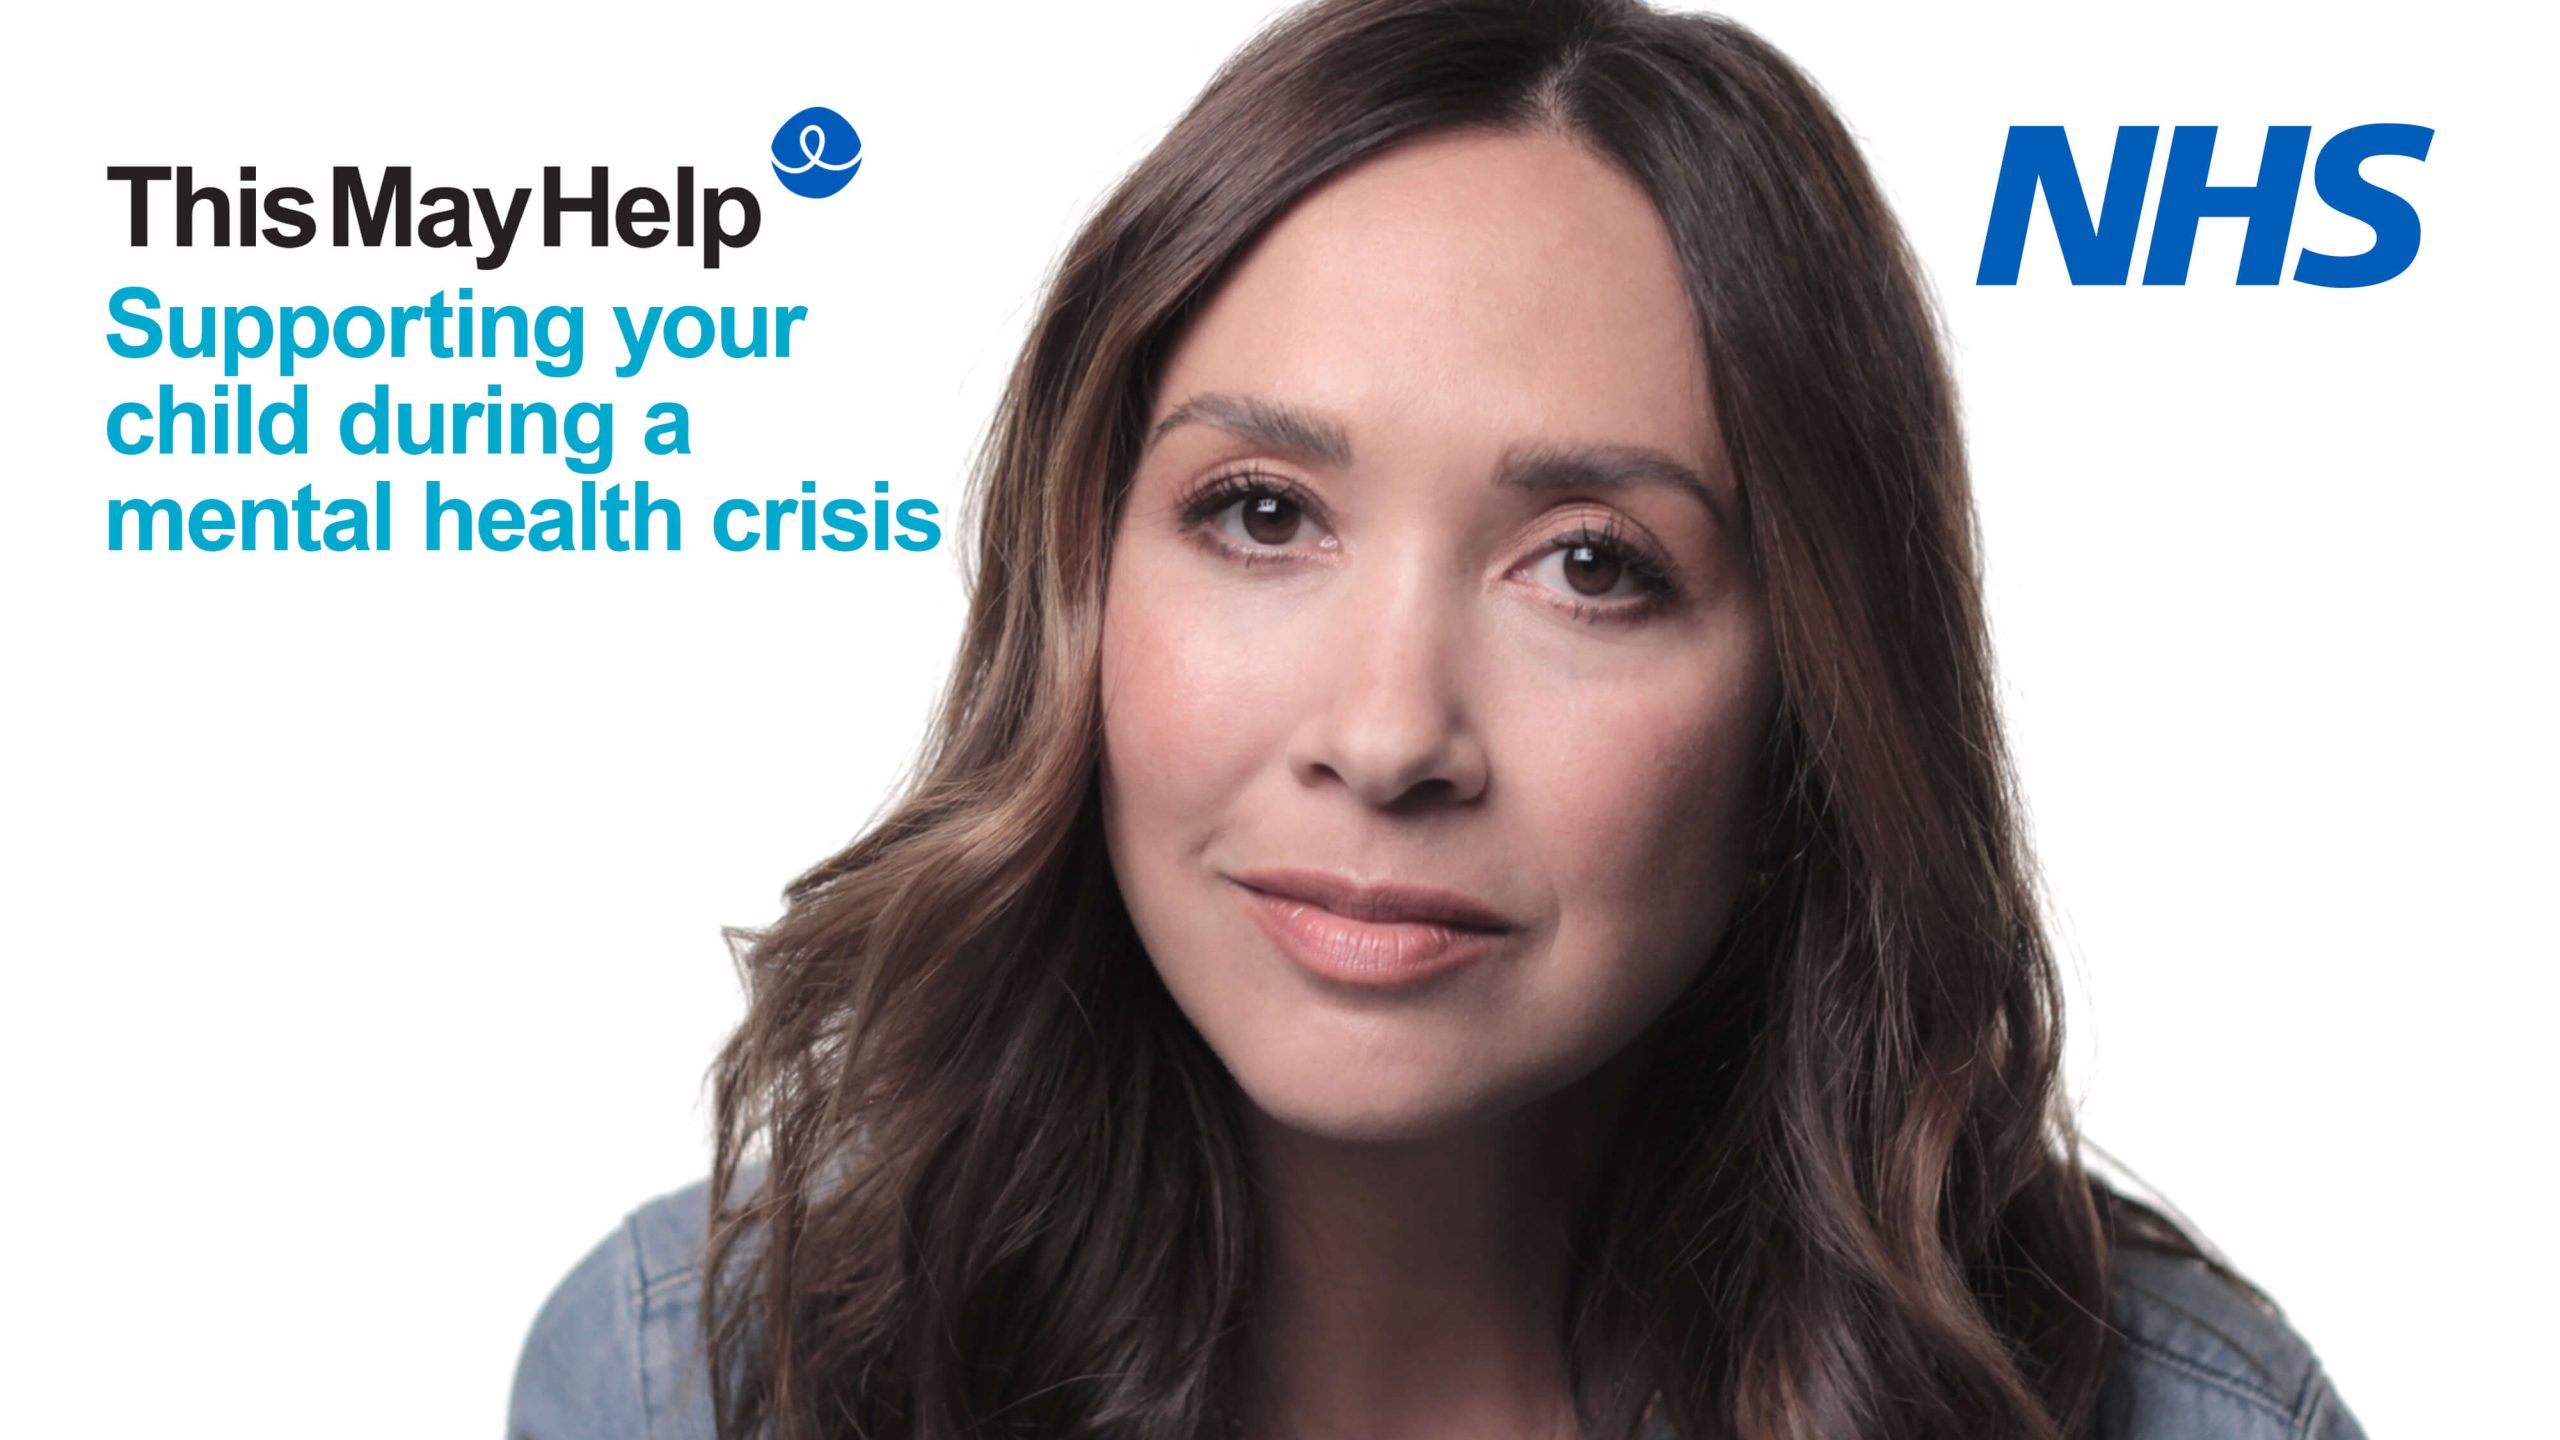 Help your child during a mental health crisis